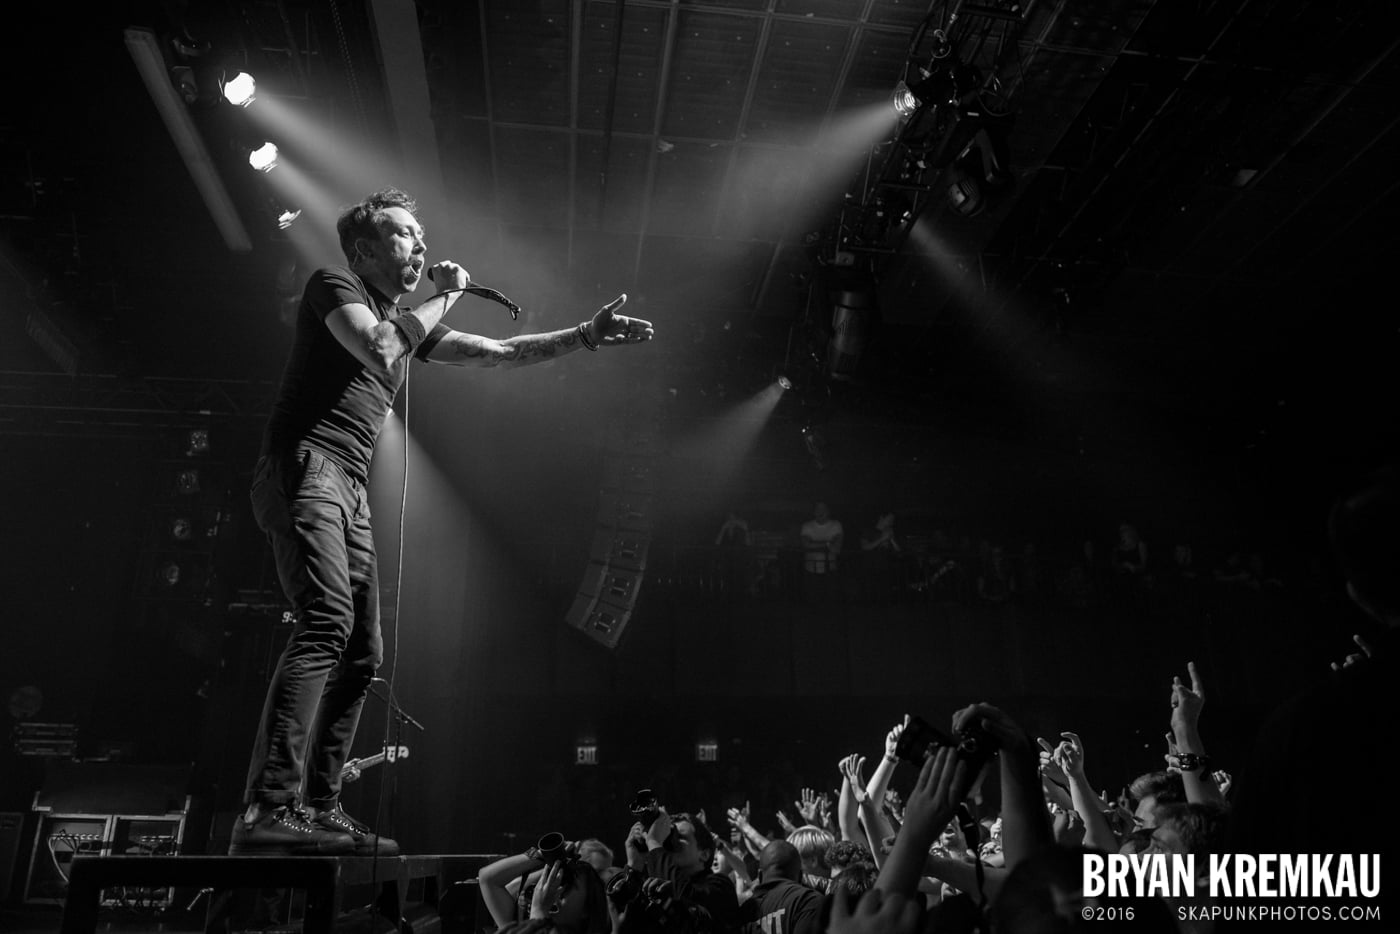 Rise Against @ Best Buy Theater, NYC - 9.26.14 (26)